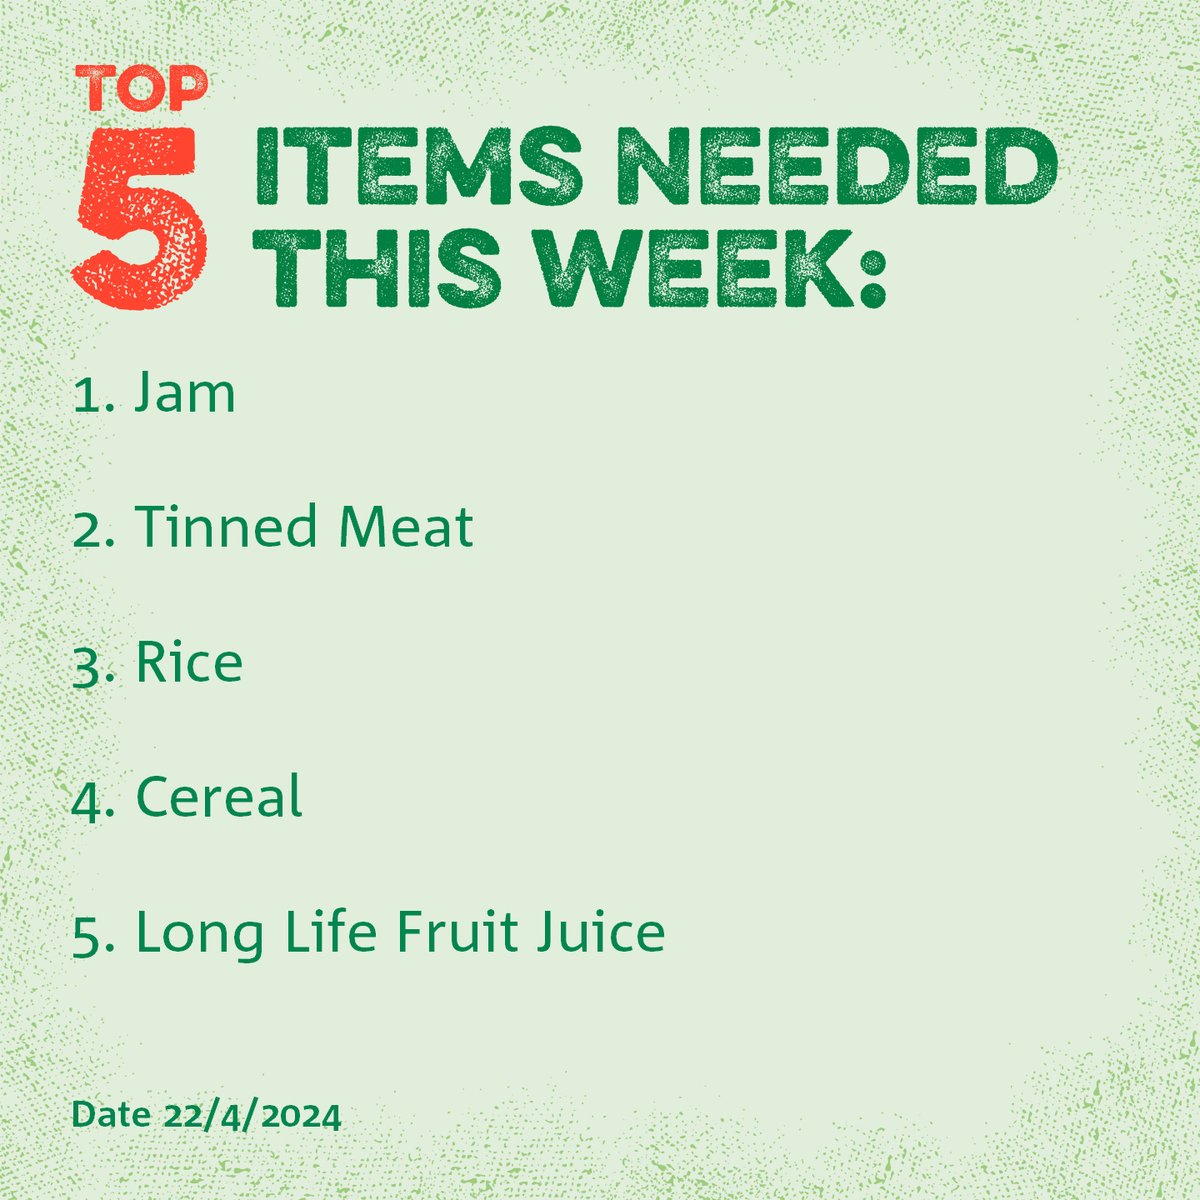 If you are able to donate to Salford Foodbank this week, here are the items we are short of. Donations can be dropped to our warehouse (4 Kansas Avenue, M50 2GL) or taken to a collection point that you can find at foodgiftbox.co.uk All donations are greatly appreciated!